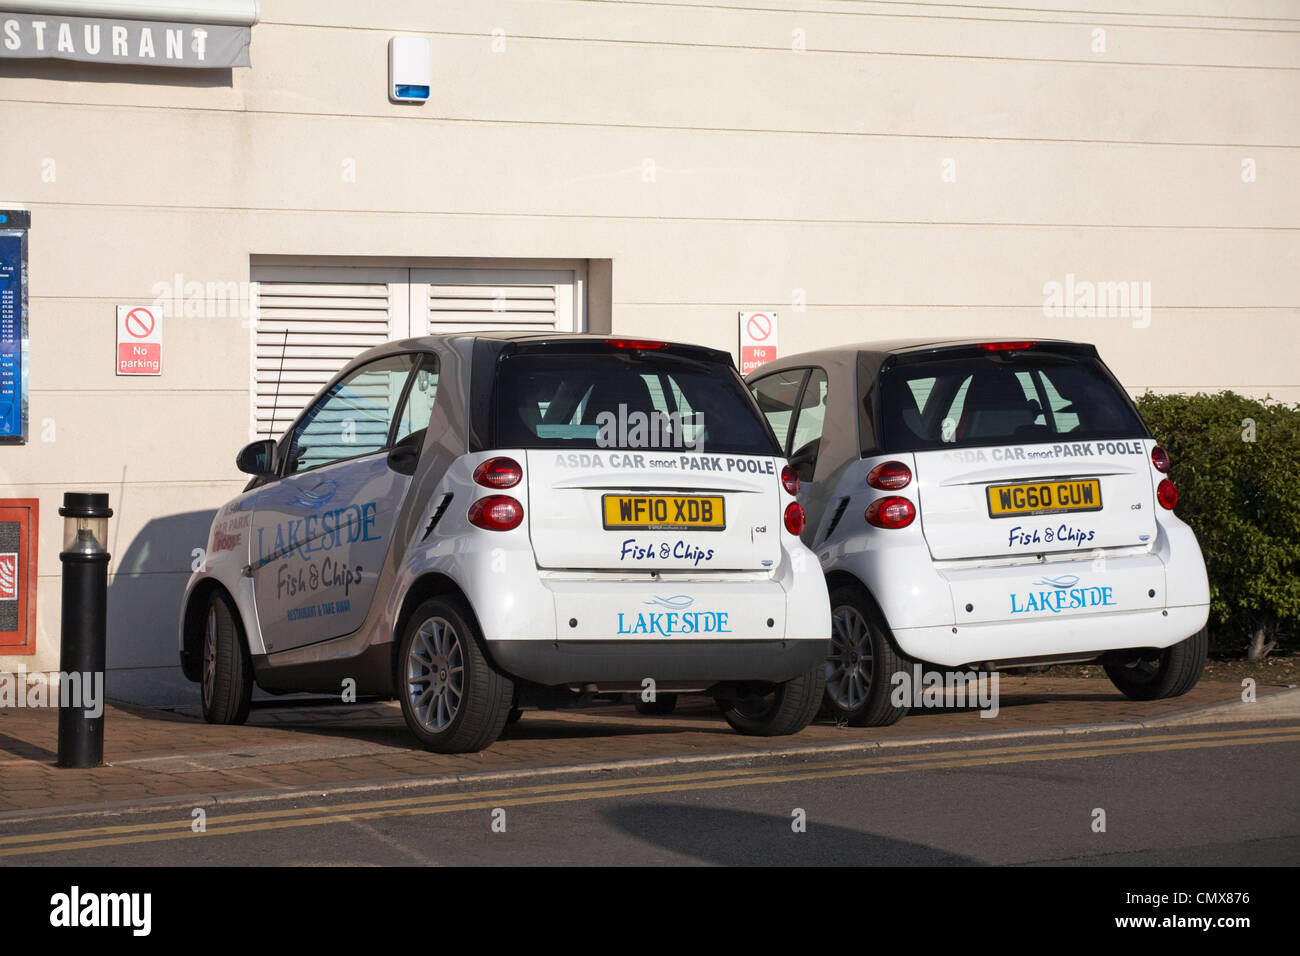 two personalised white Smart cars advertising Lakeside Fish & Chips parked outside restaurant in Asda car park Poole, Dorset UK in January Stock Photo